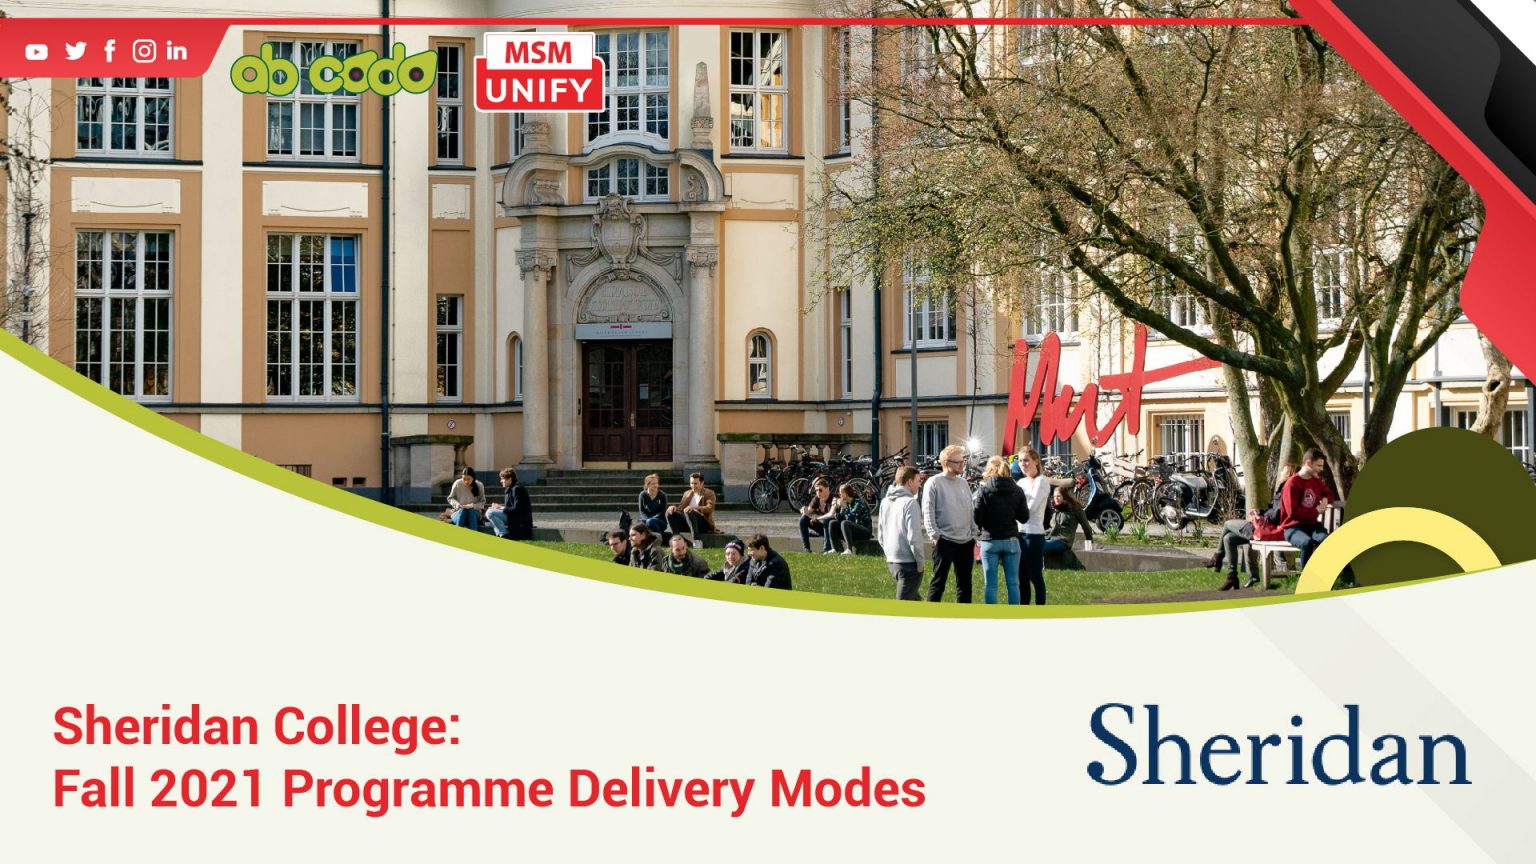 Sheridan College: Fall 2021 Program Delivery Modes